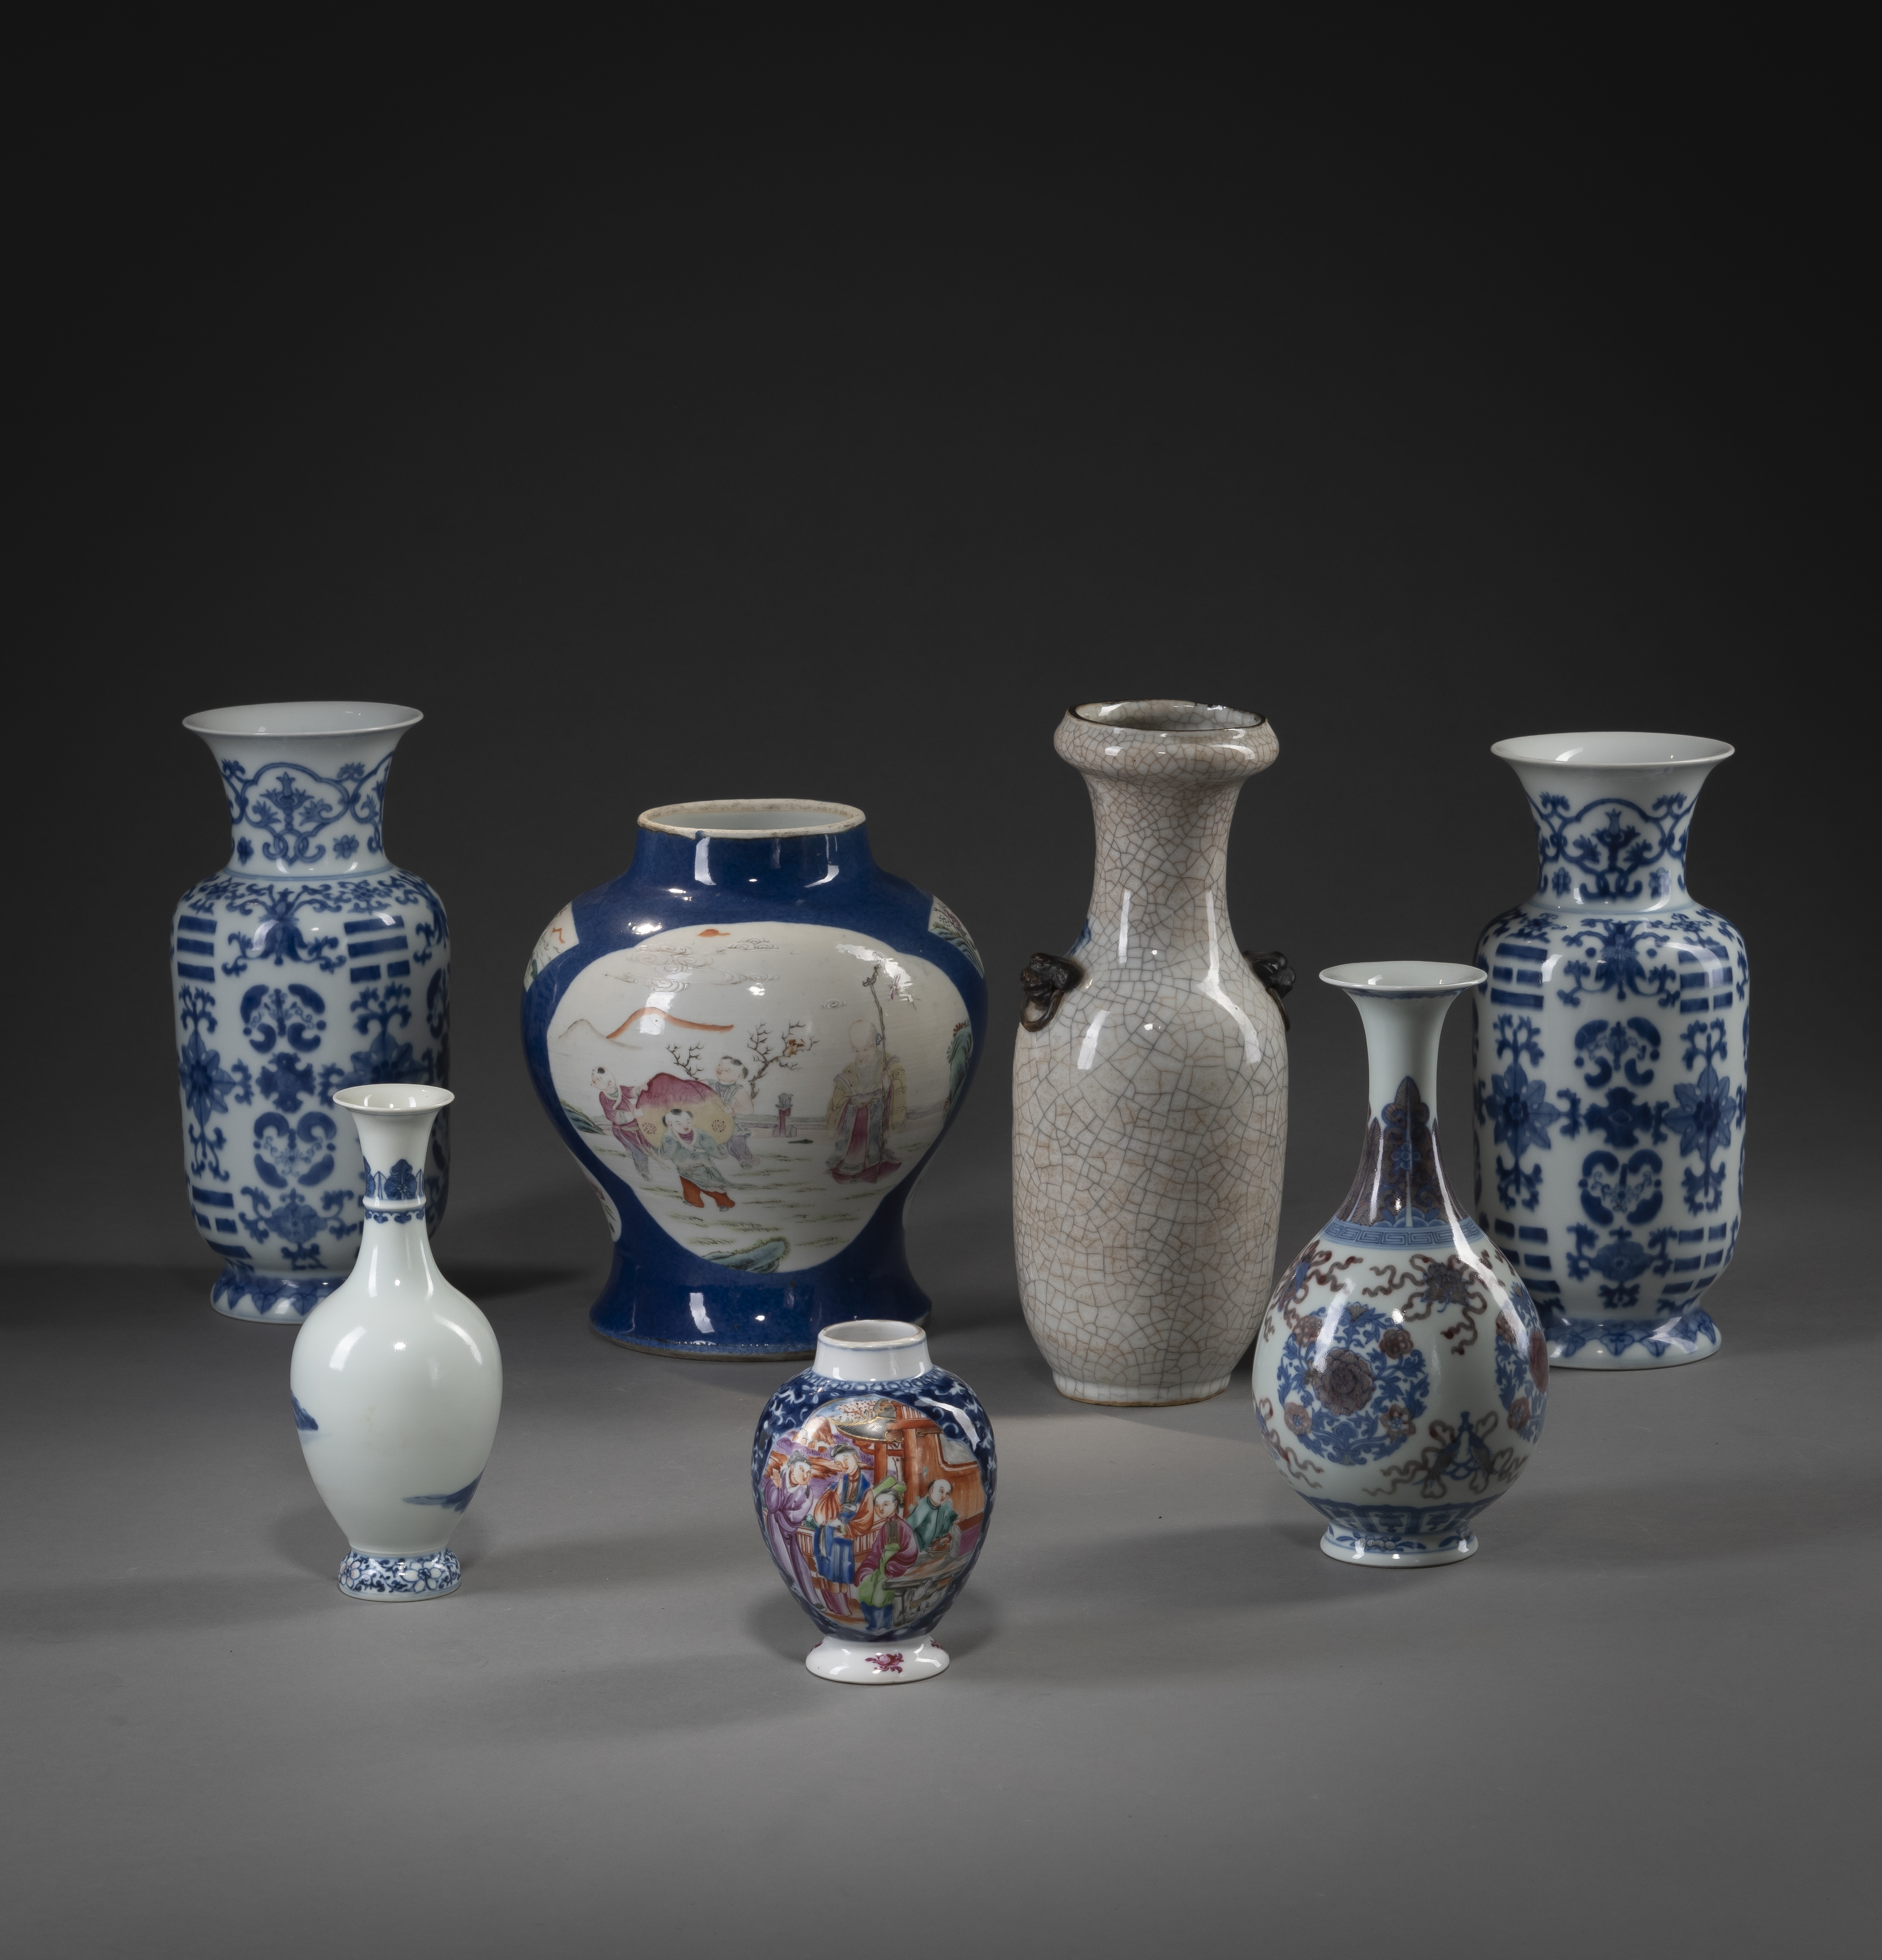 SEVEN BLUE AND WHITE PORCELAIN VASES SHOWING FIGURES, A LANDSCAPE, AND TRIGRAMS - Image 3 of 5